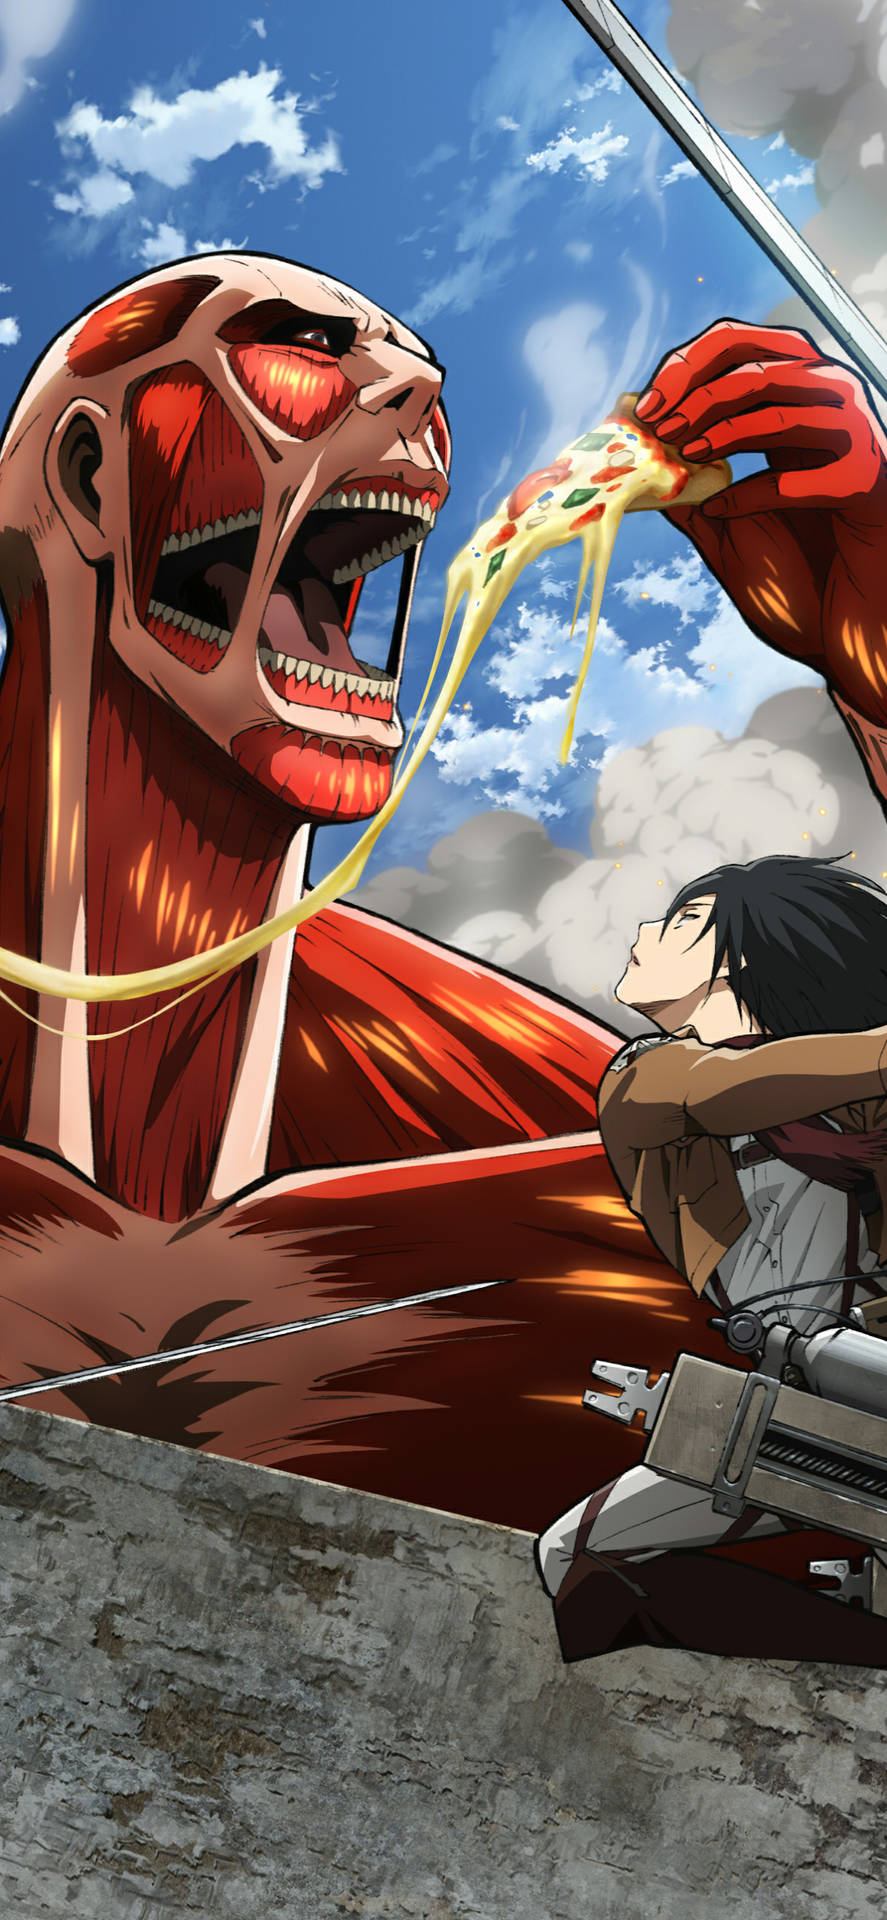 Colossal Eating Pizza Attack On Titan Iphone Background